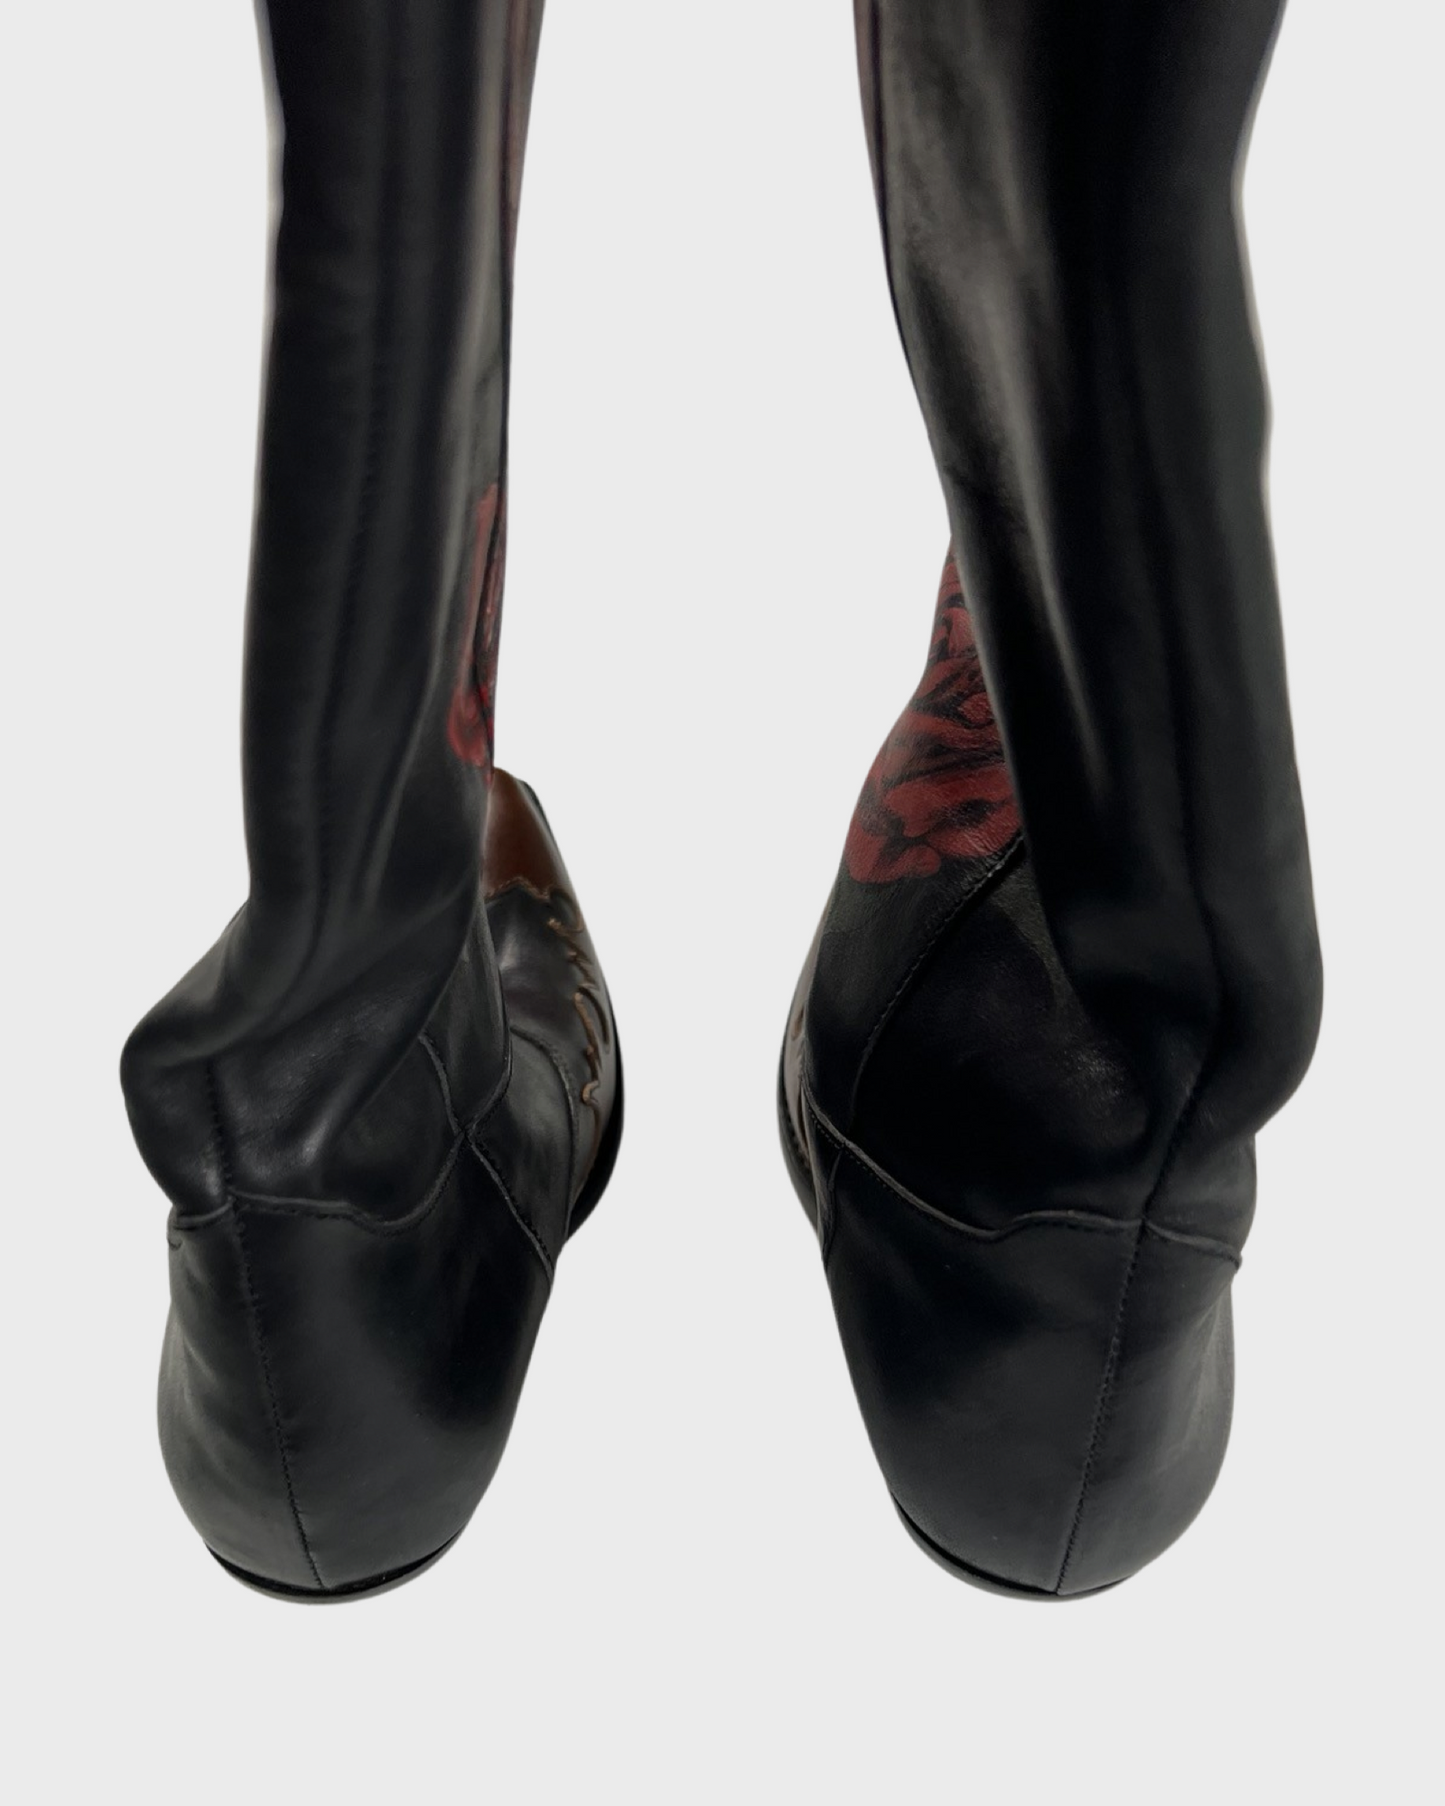 Vetements AW16 runway hand painted  Boots SZ:39